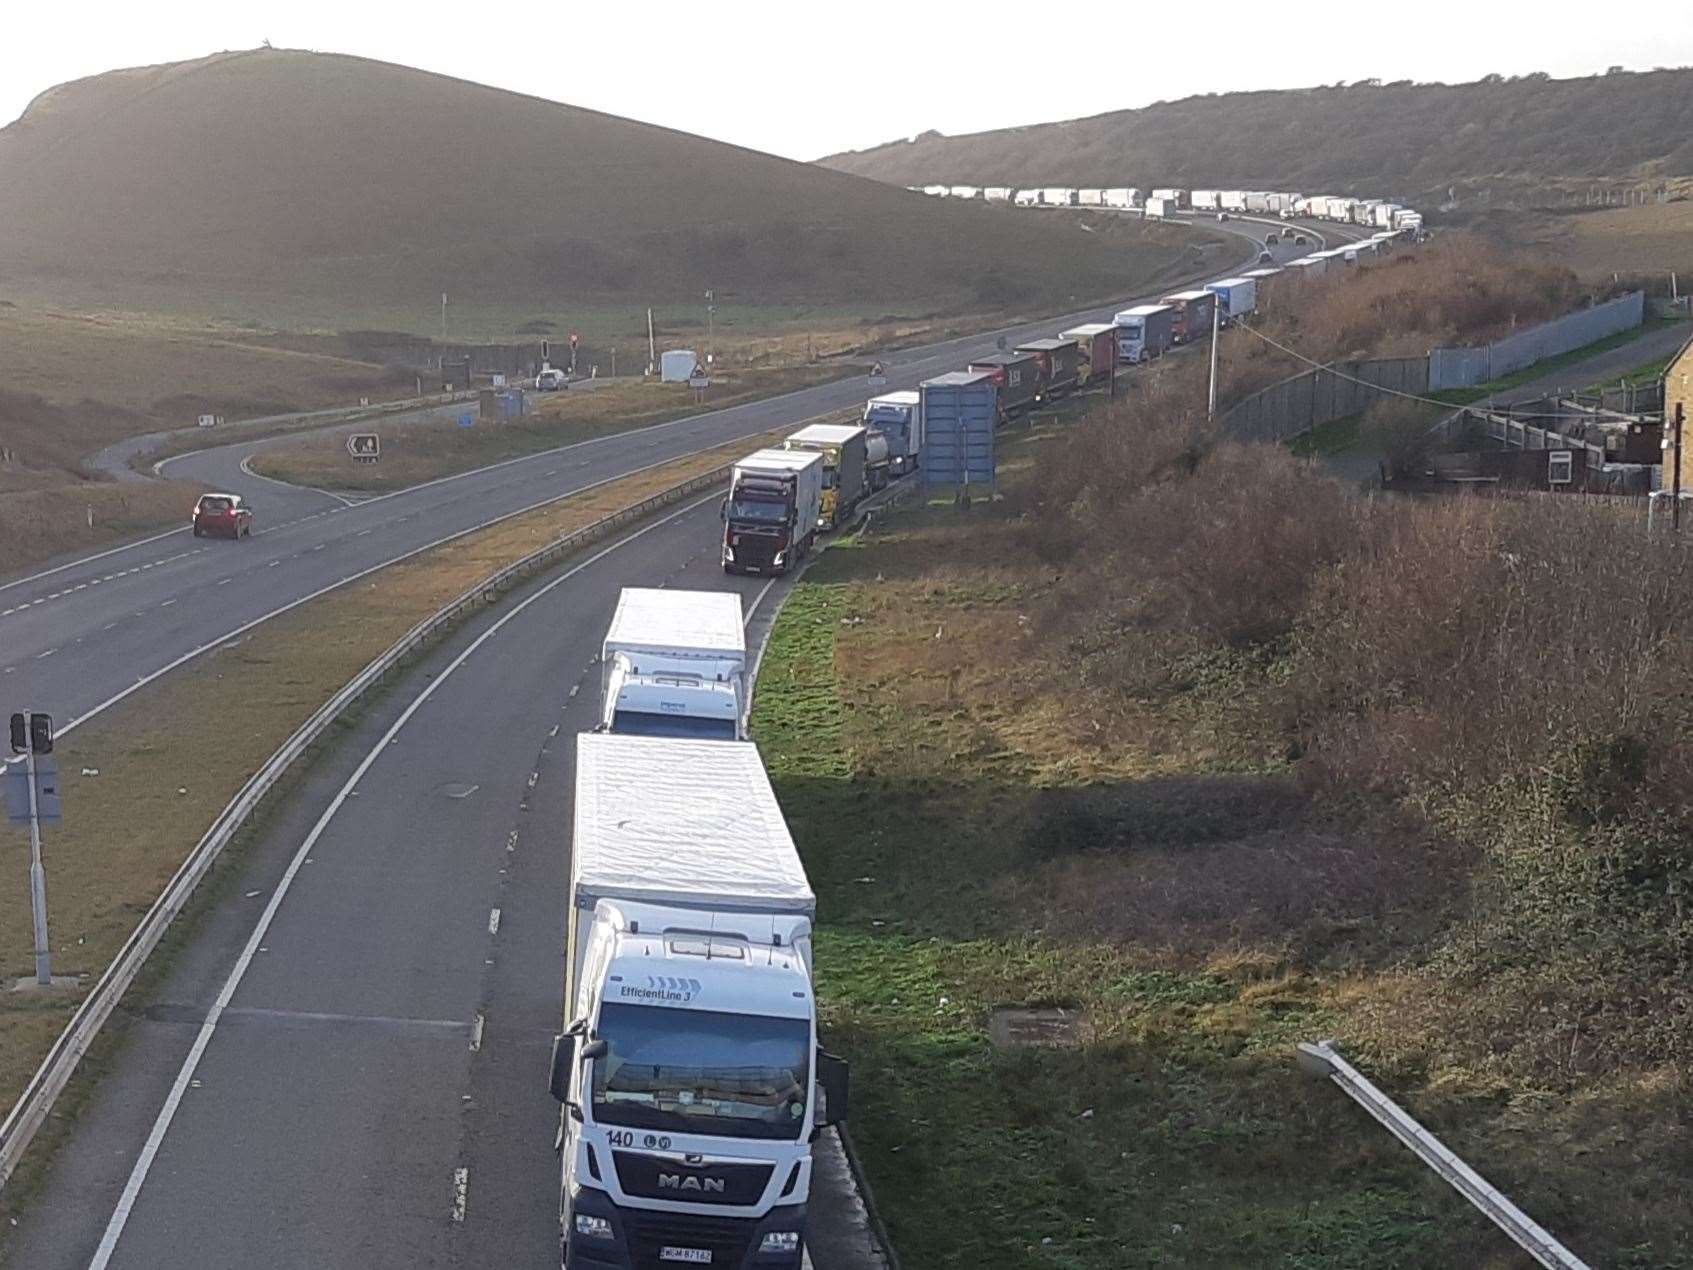 Lorry delays happen for various reasons. This one at Dover, before last month's French border shutdown, was partly due to supply lines affected by coronavirus.